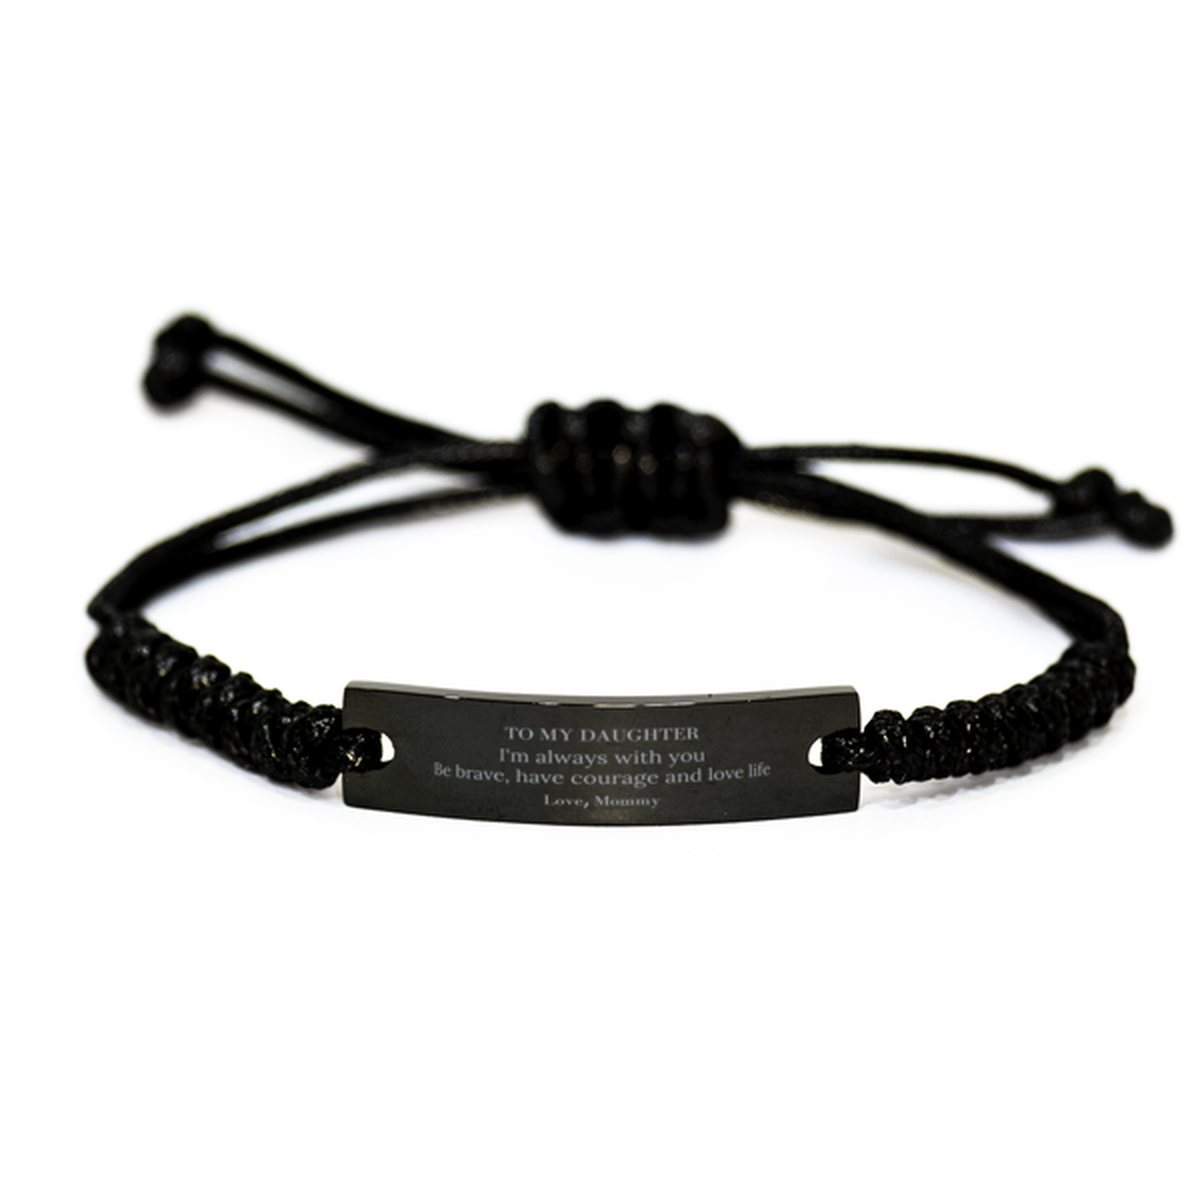 To My Daughter Gifts from Mommy, Unique Black Rope Bracelet Inspirational Christmas Birthday Graduation Gifts for Daughter I'm always with you. Be brave, have courage and love life. Love, Mommy